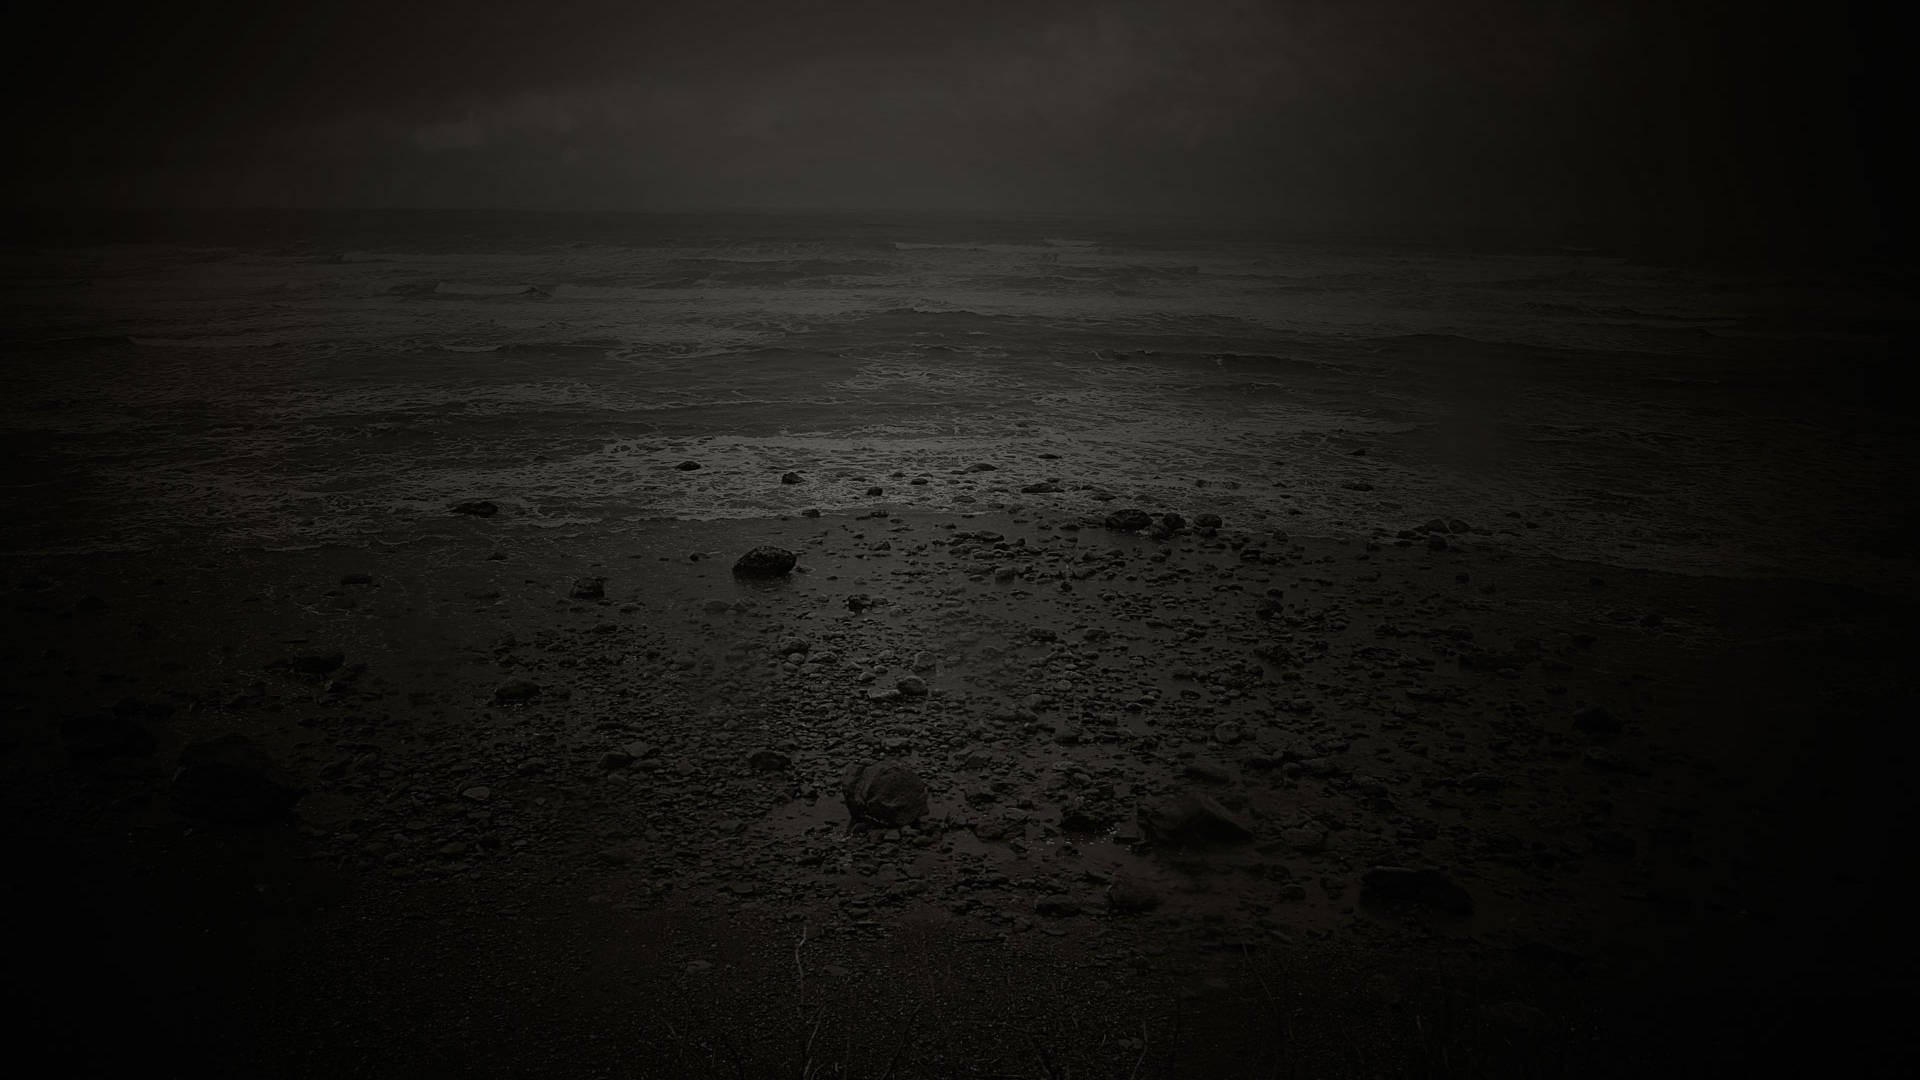 A dark and moody image of a barren landscape with a misty atmosphere - Depression